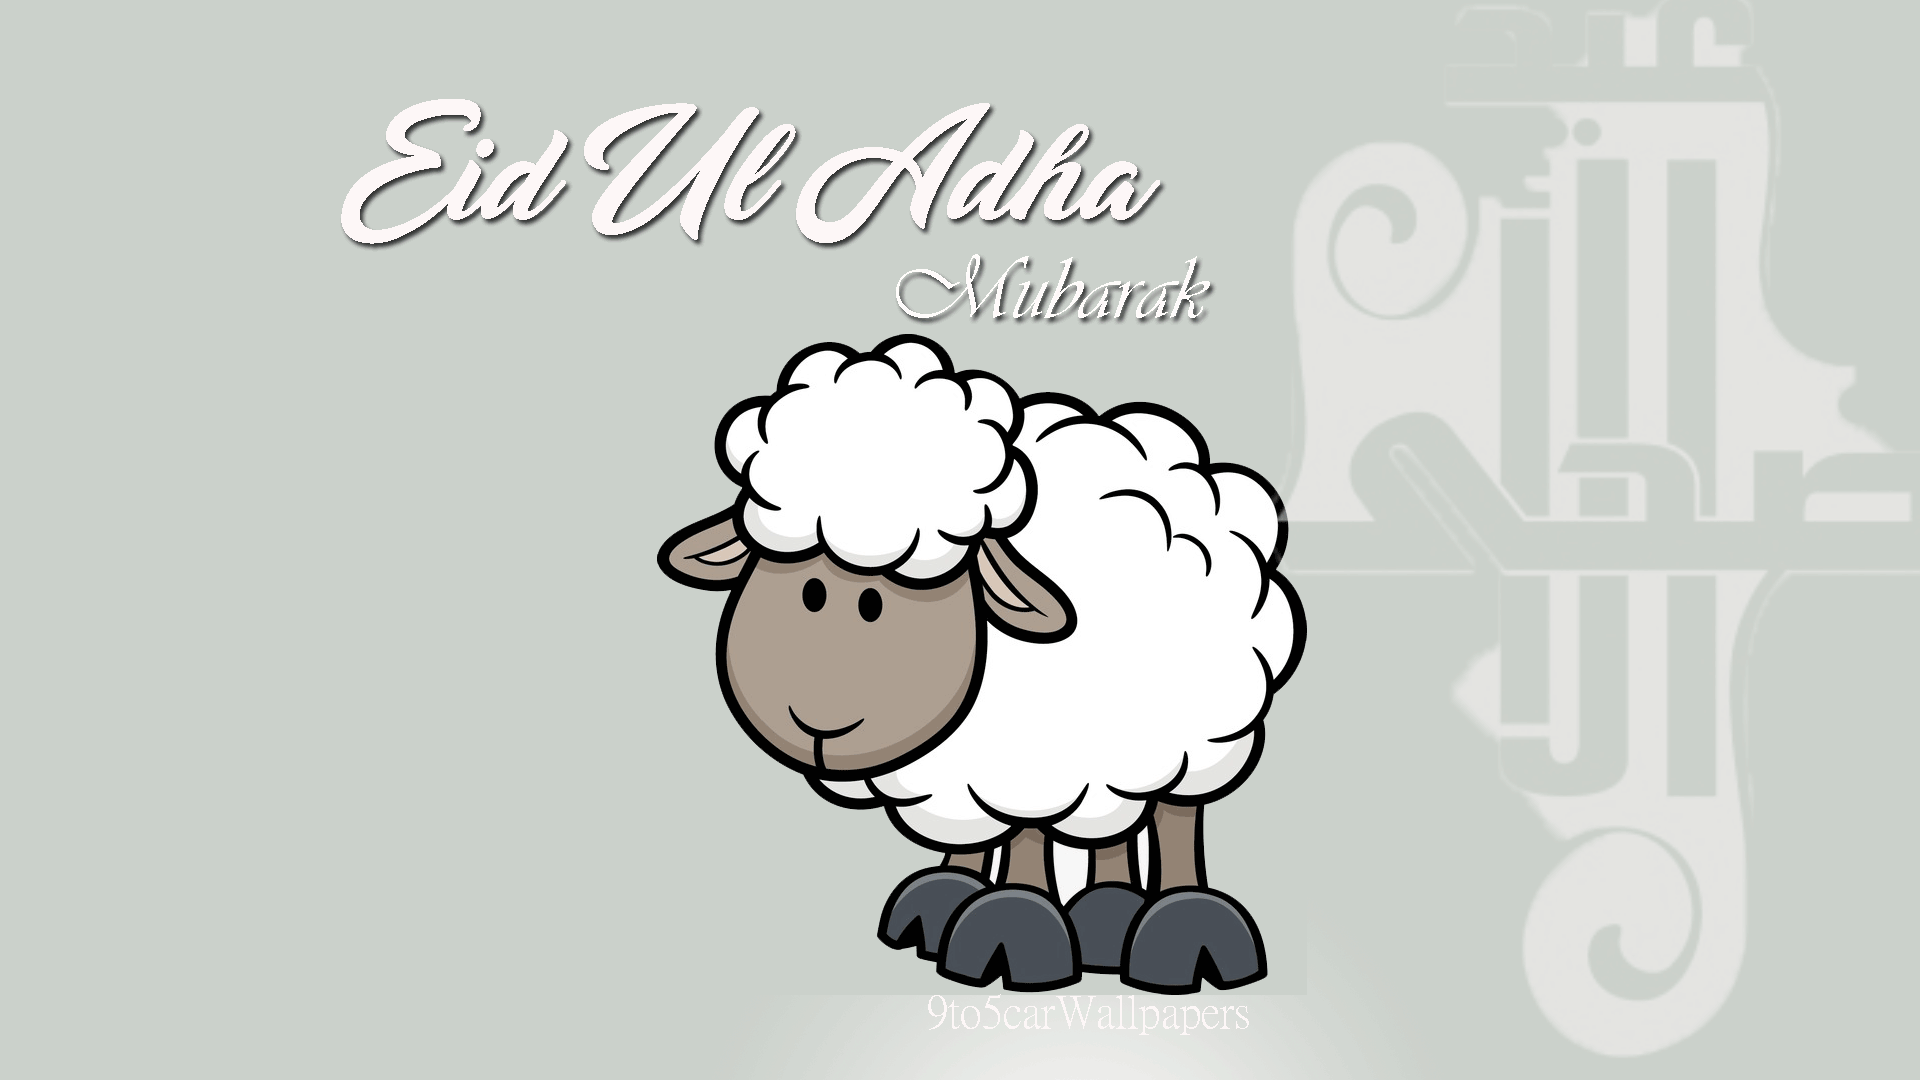 2018 Eid Al Adha Animated GIF Wallpapers & Wishes - 9to5 Car Wallpapers